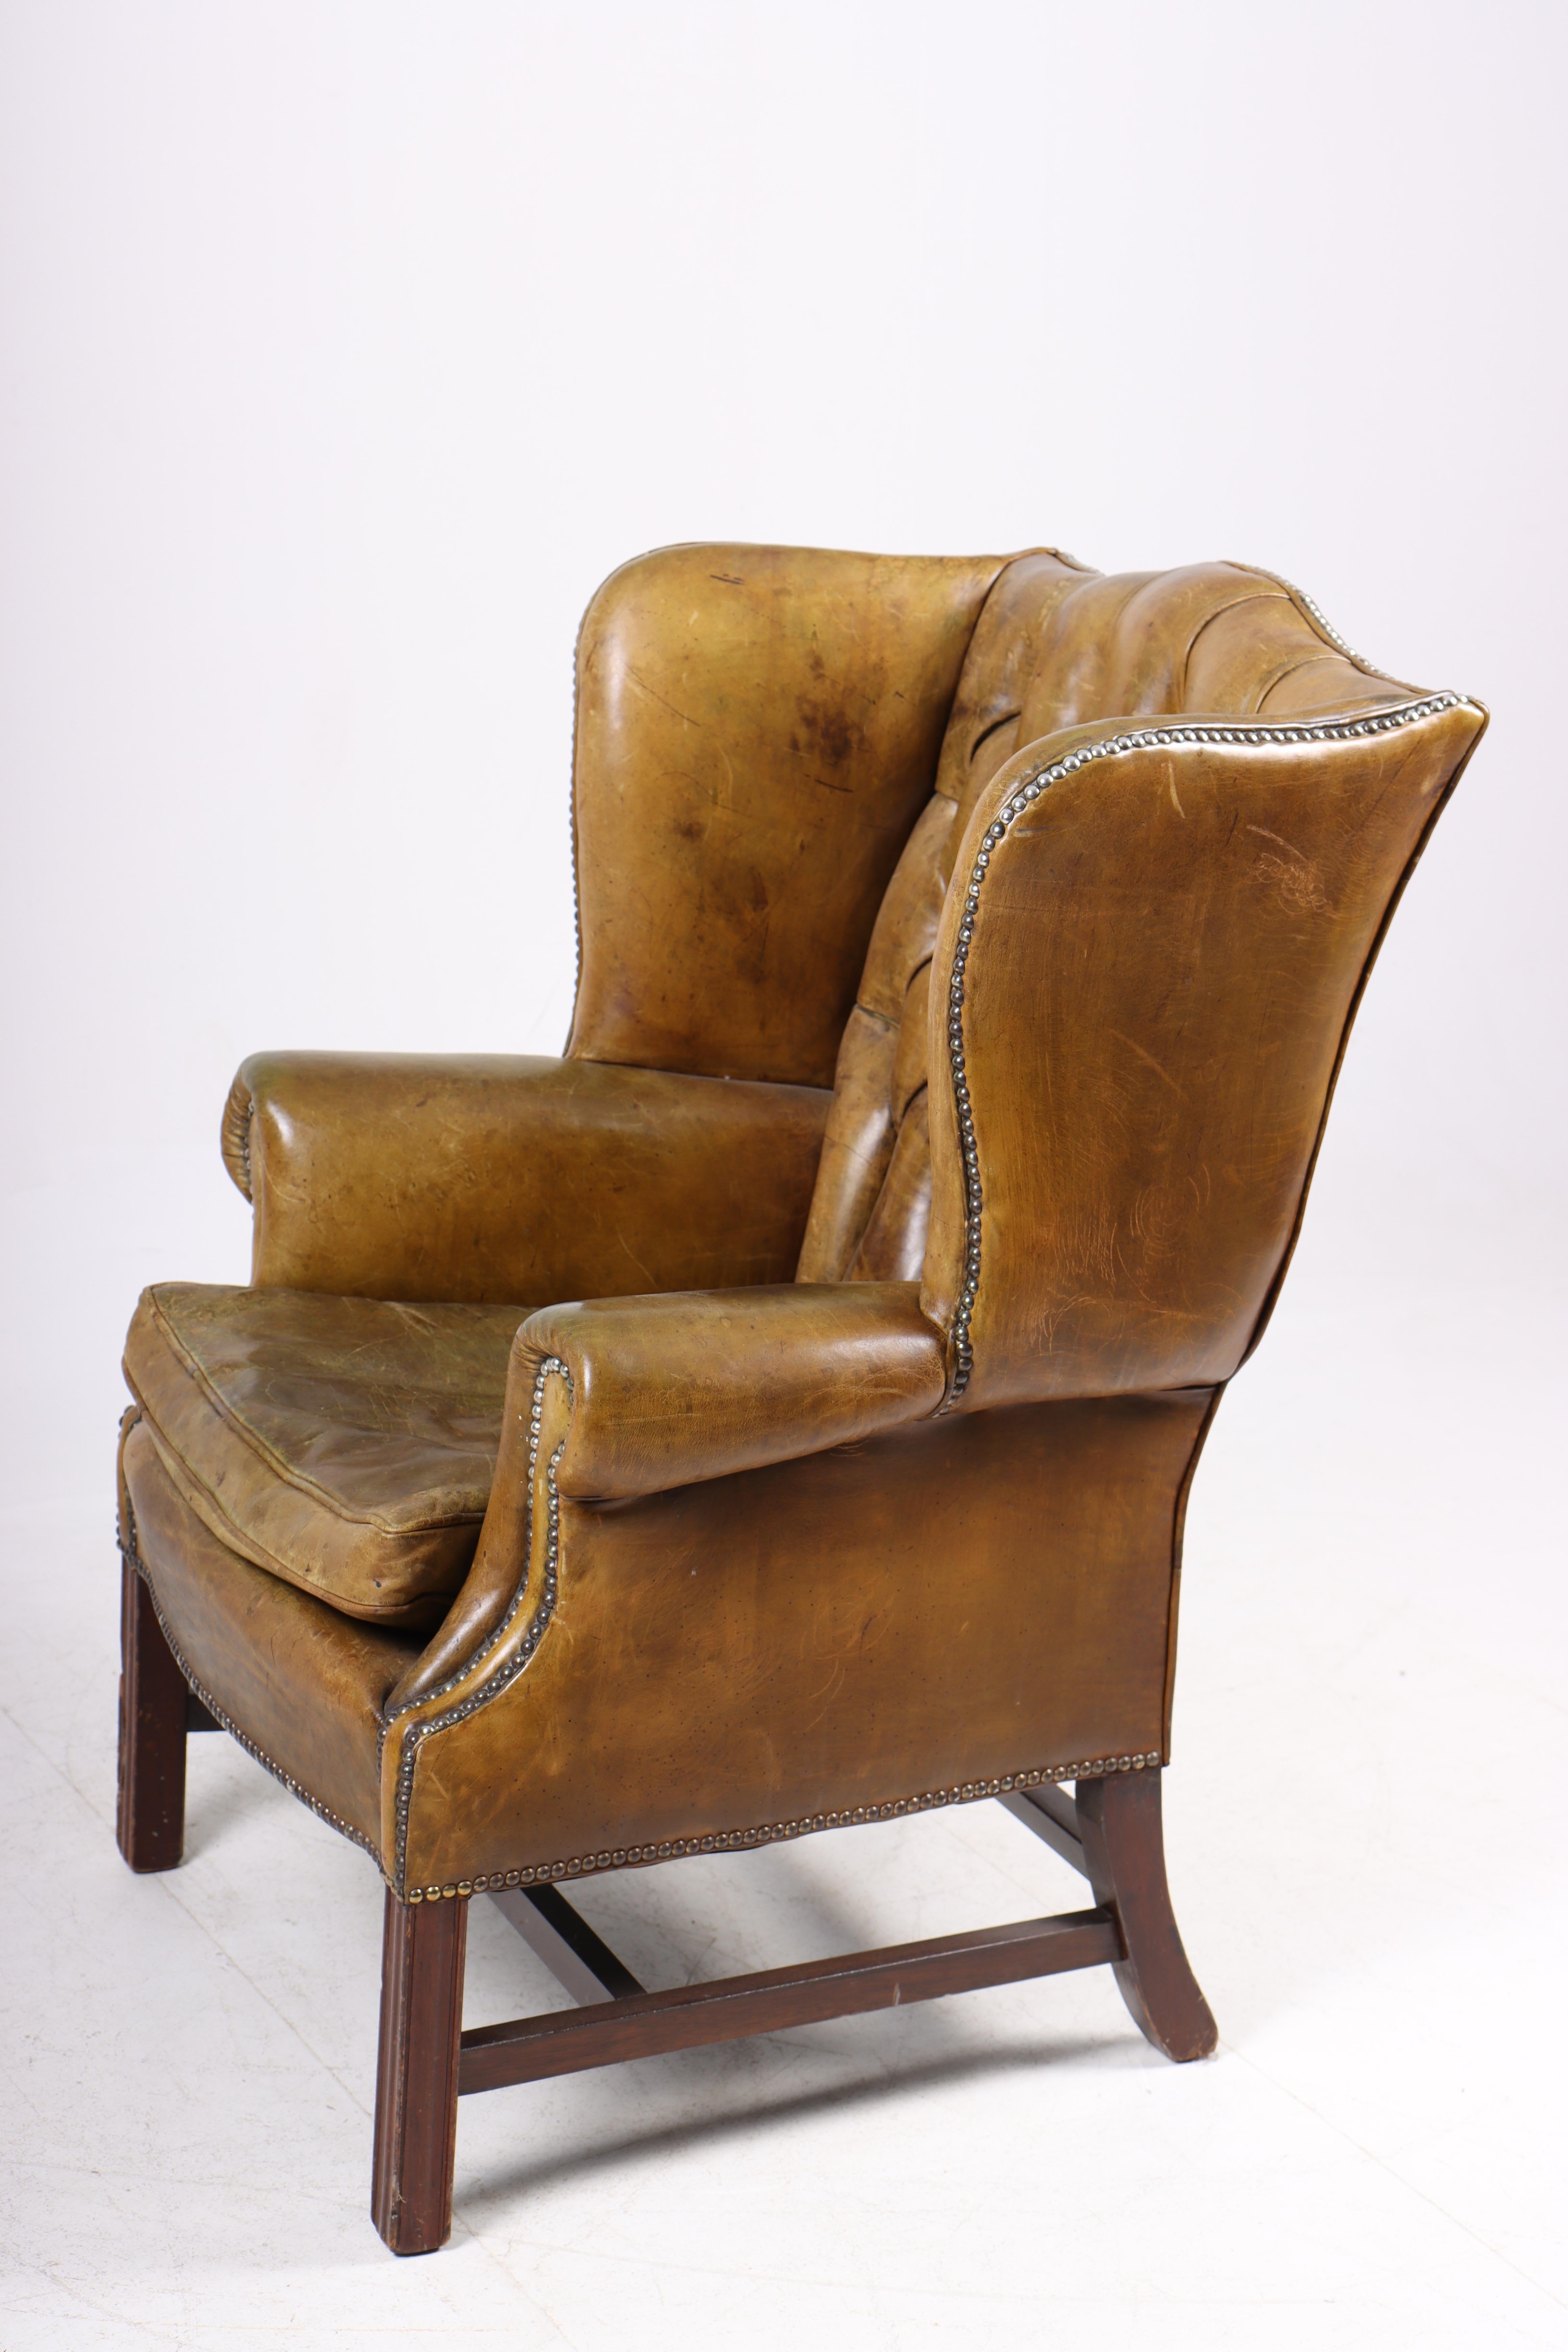 Danish Chesterfield Wingback Chair in Leather, Made in Denmark 1950s For Sale